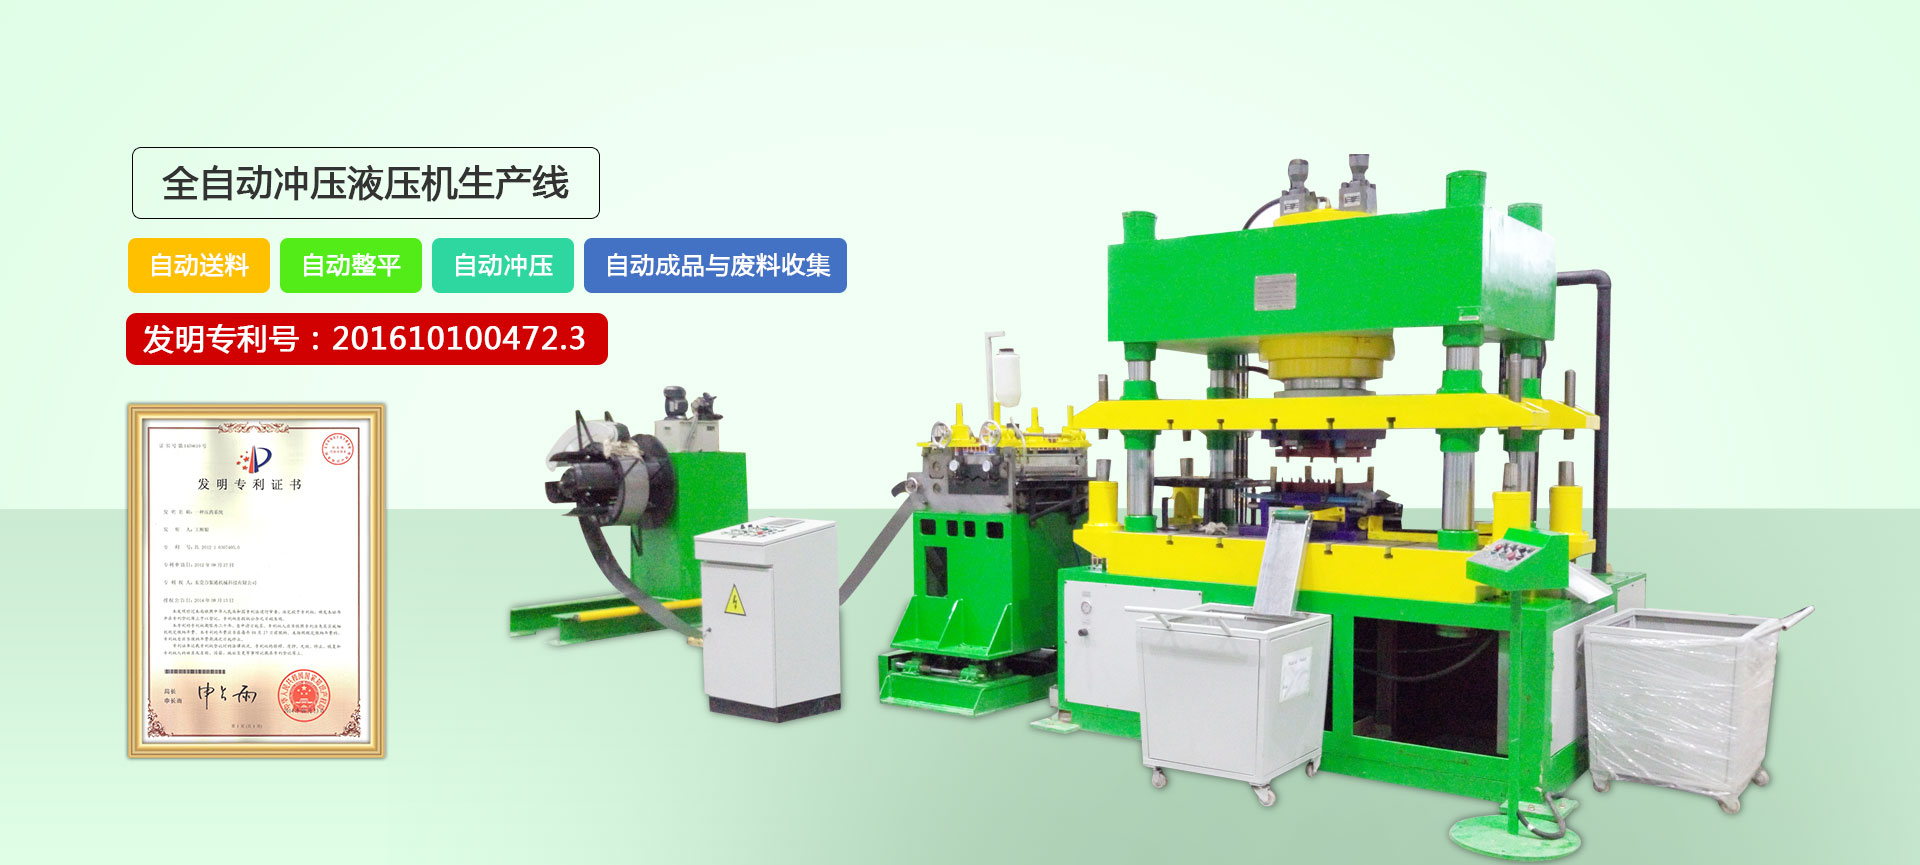 PIck and Pace Hydraulic Press Line